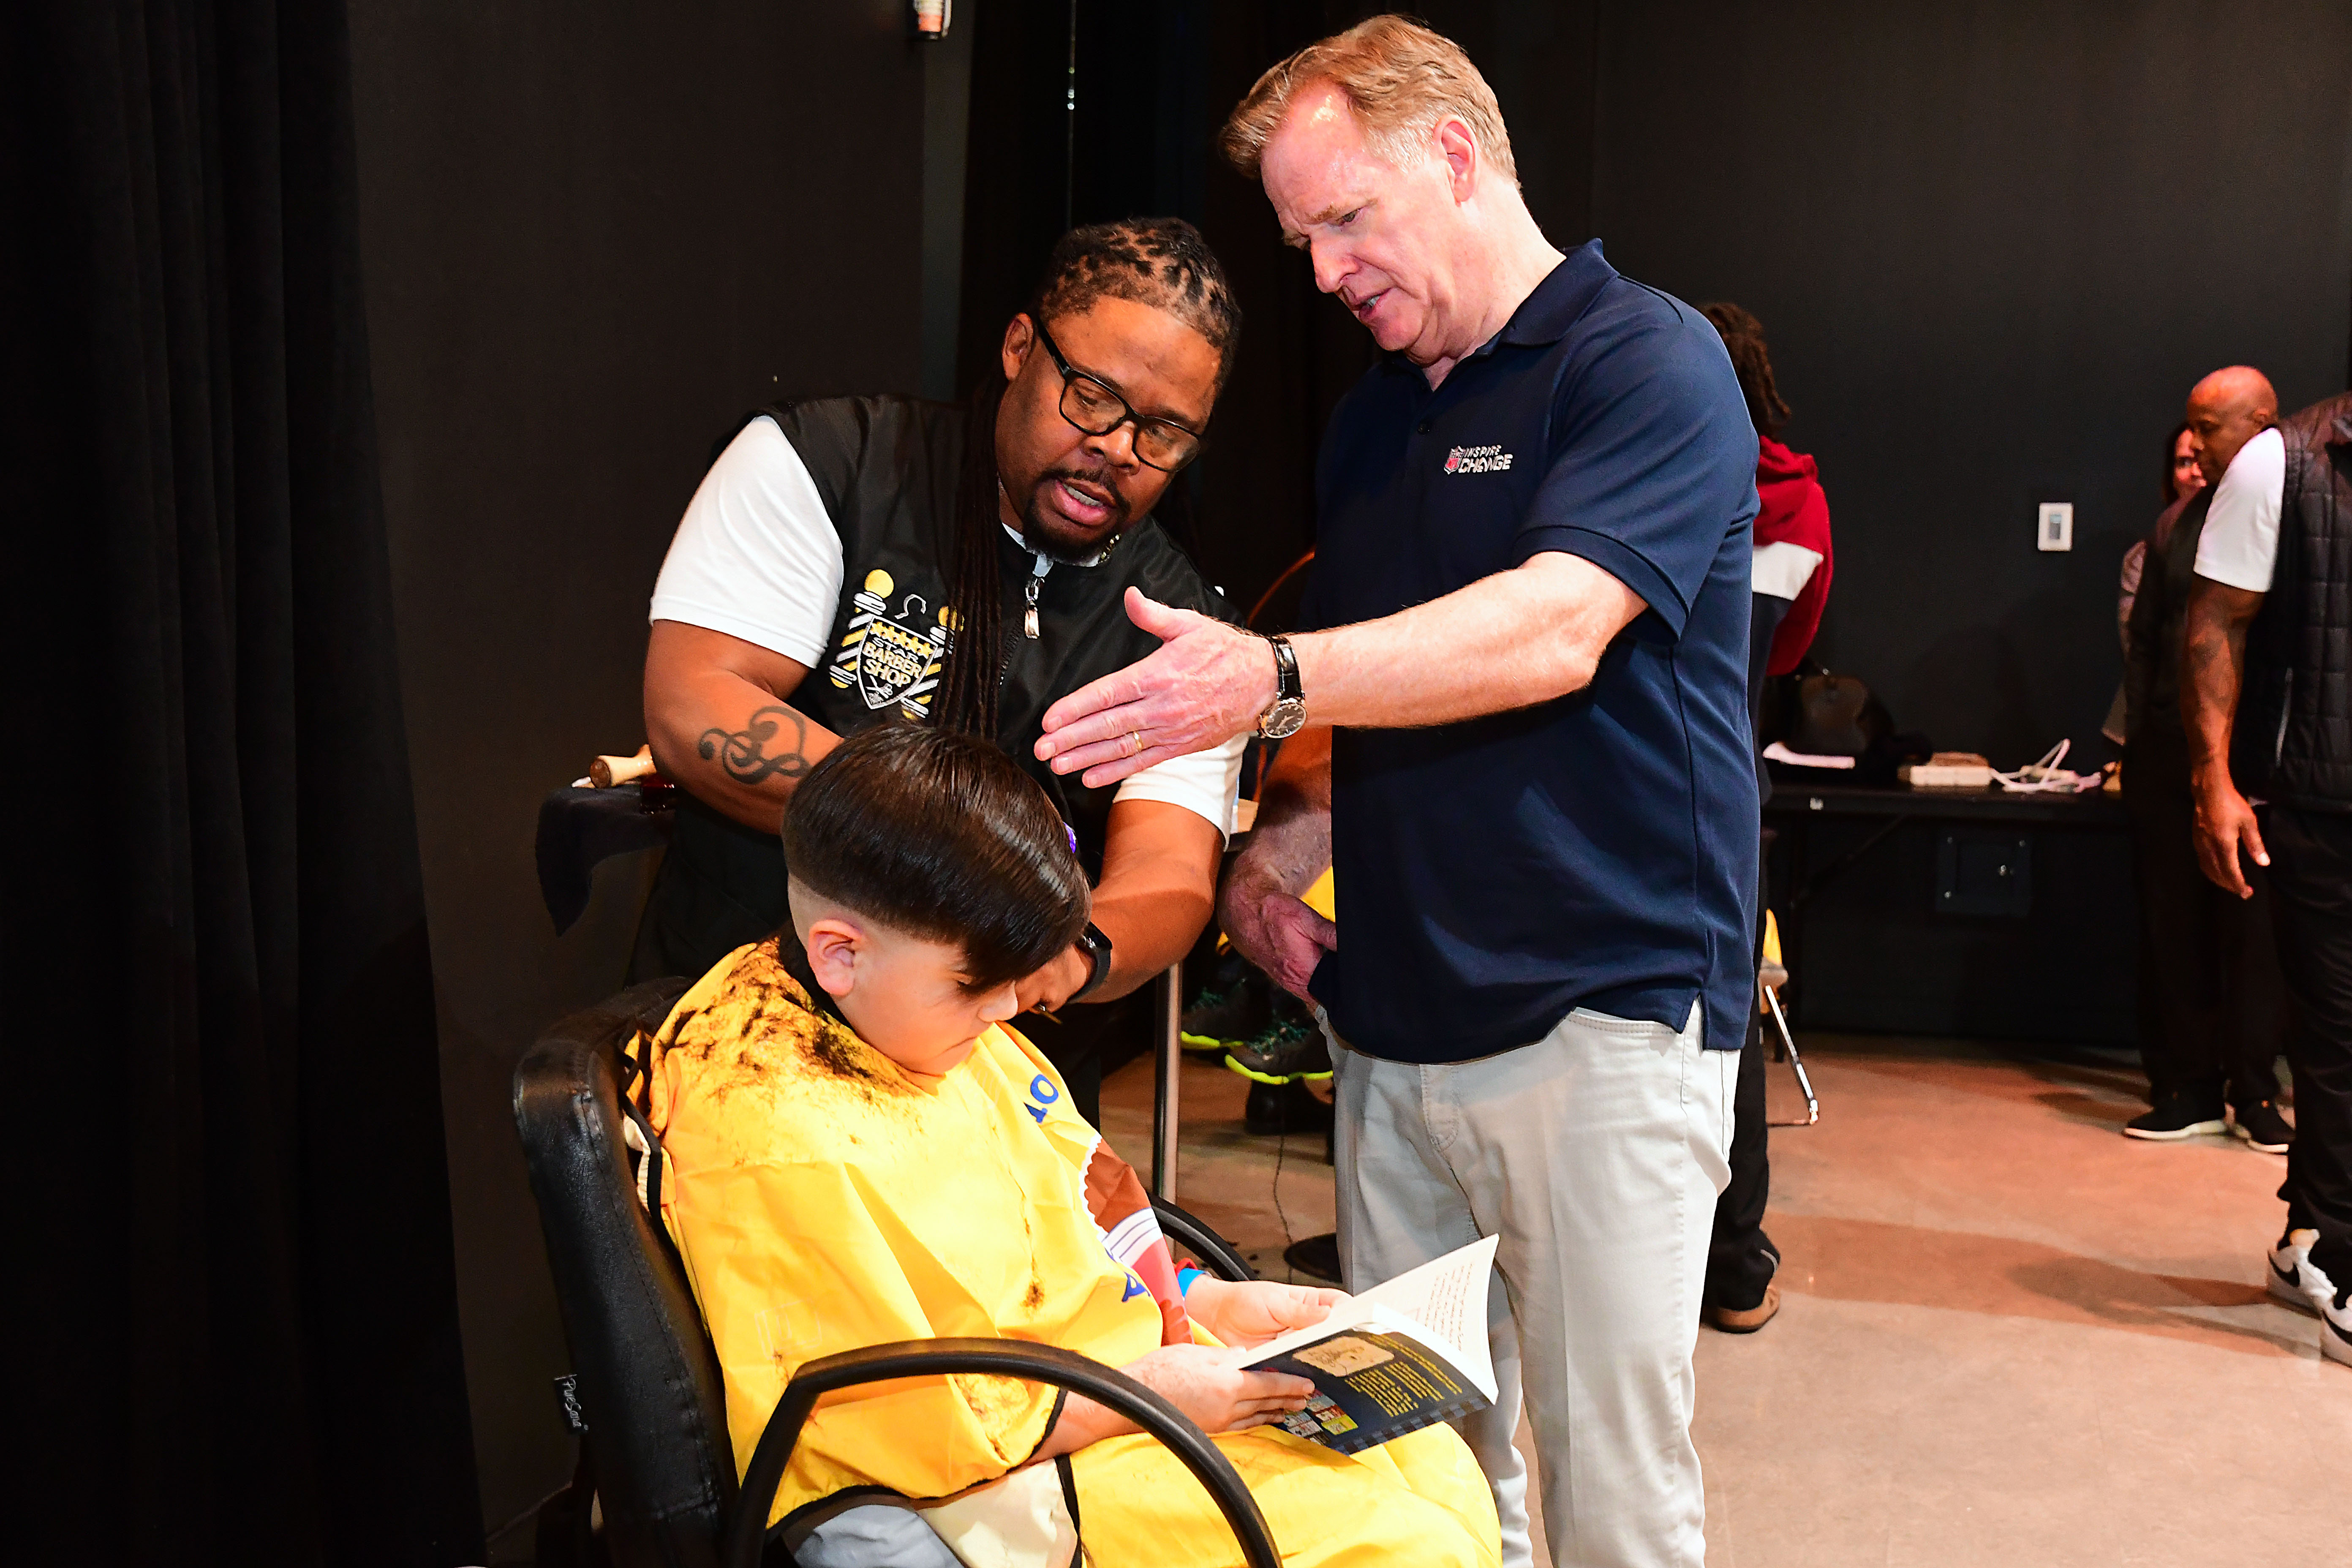 NFL Commissioner Roger Goodell, right, learns technique from Michael Joyner of 5 Star Barbershop at the launch of the Barbershop Books program in Las Vegas.